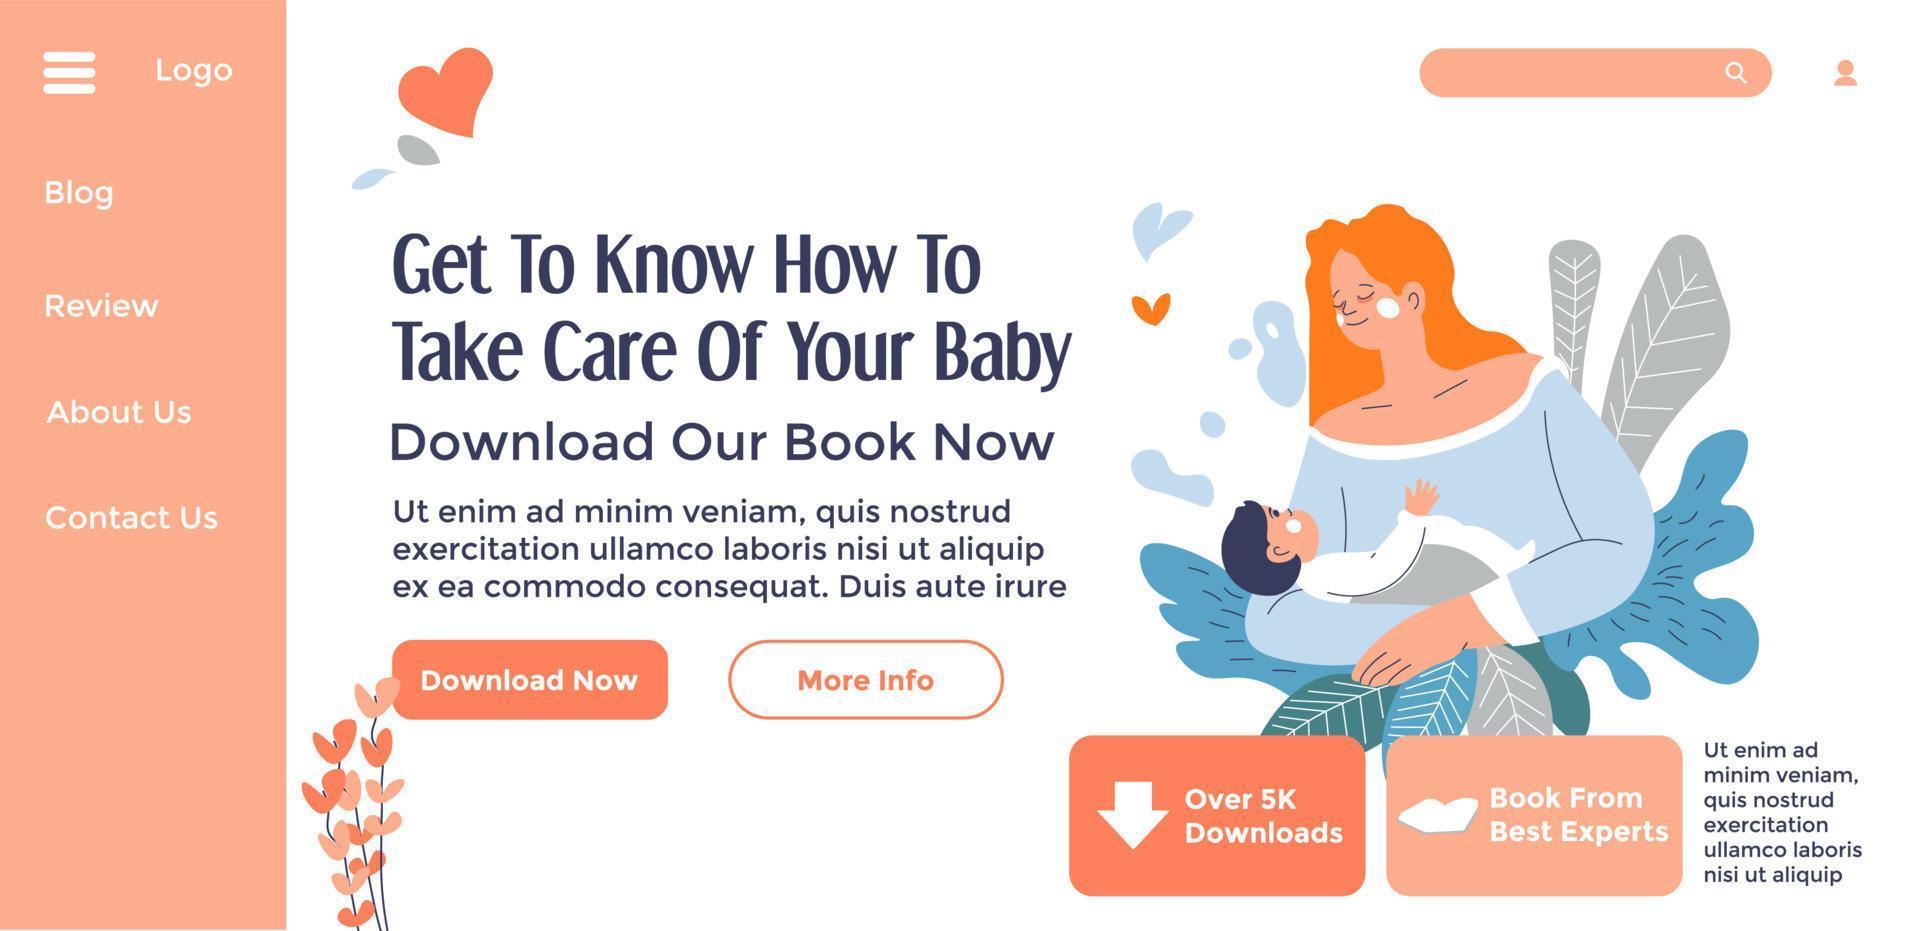 Get to know how to take care of your baby, guide vector